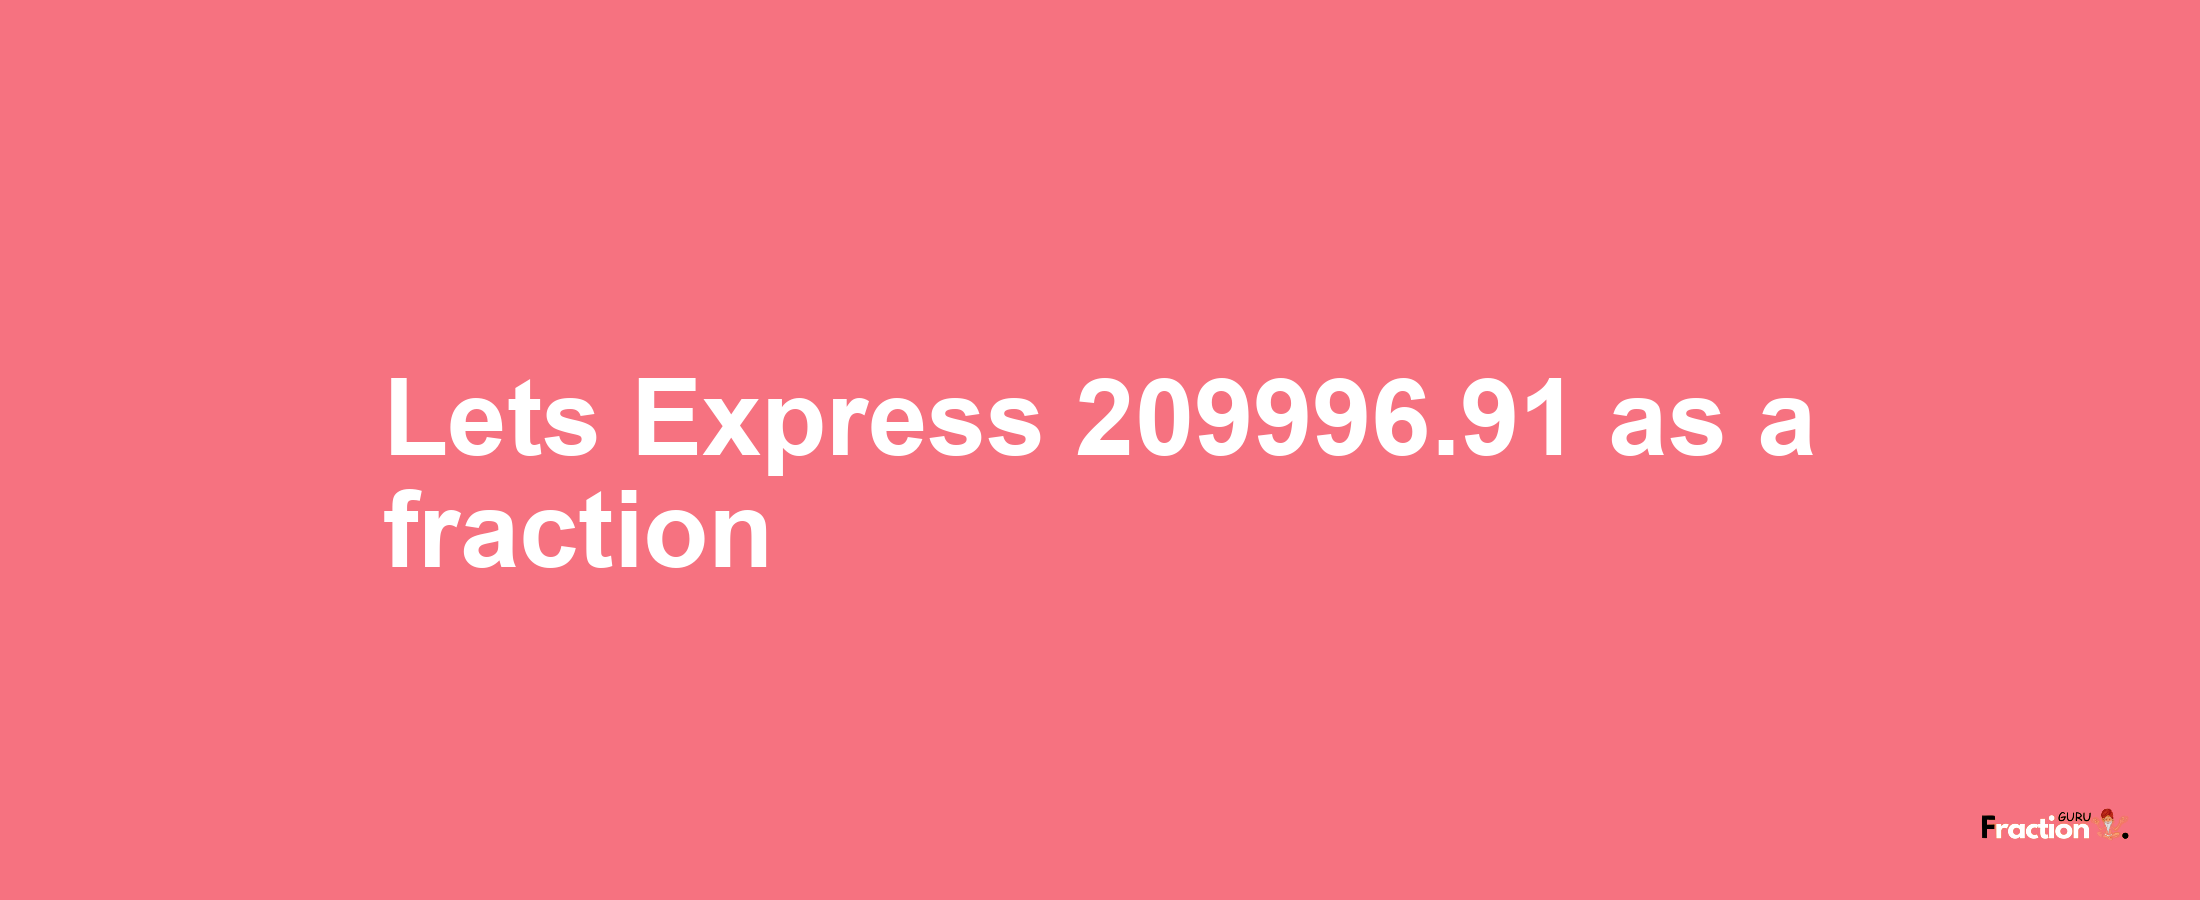 Lets Express 209996.91 as afraction